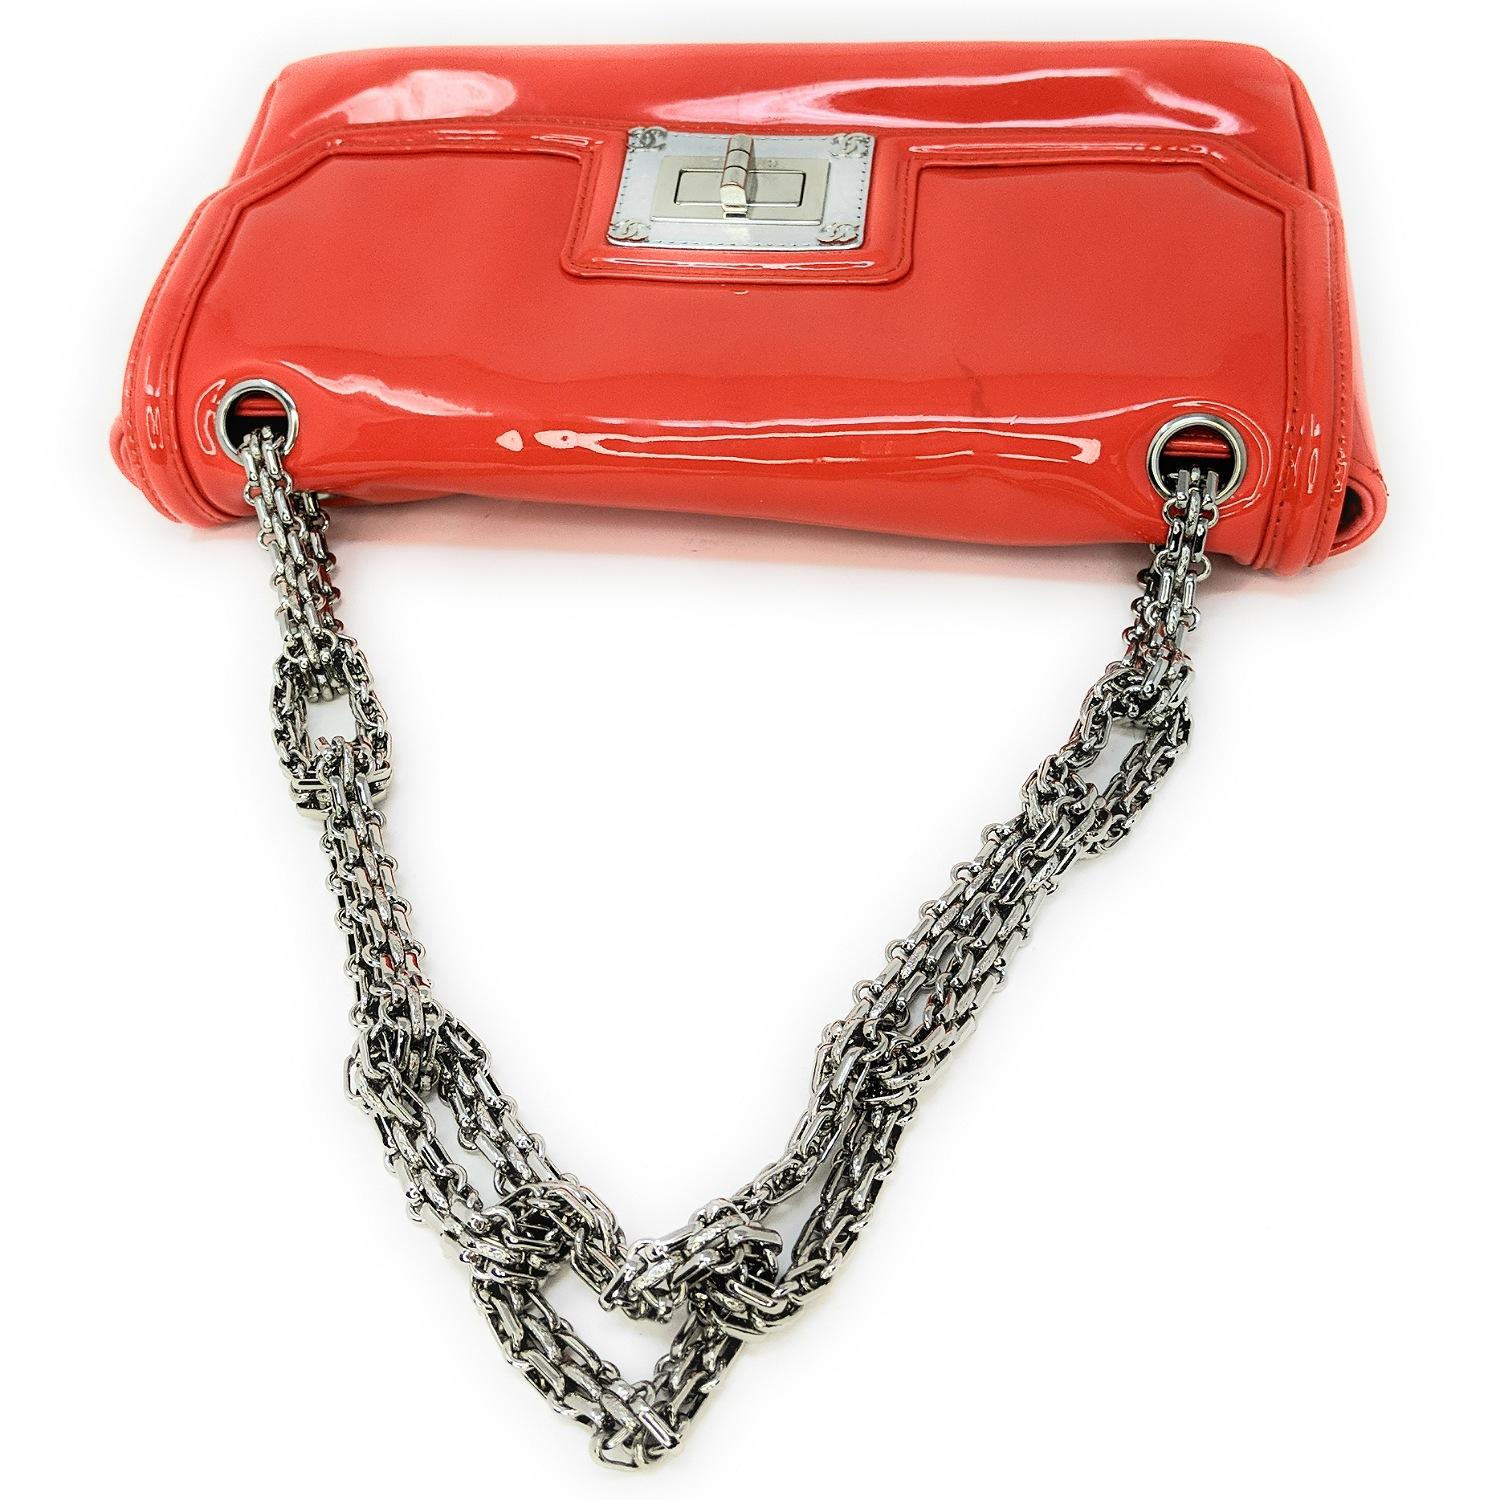 Chanel Mademoiselle Lock Linked Bijoux Chain Flap In Good Condition For Sale In Scottsdale, AZ